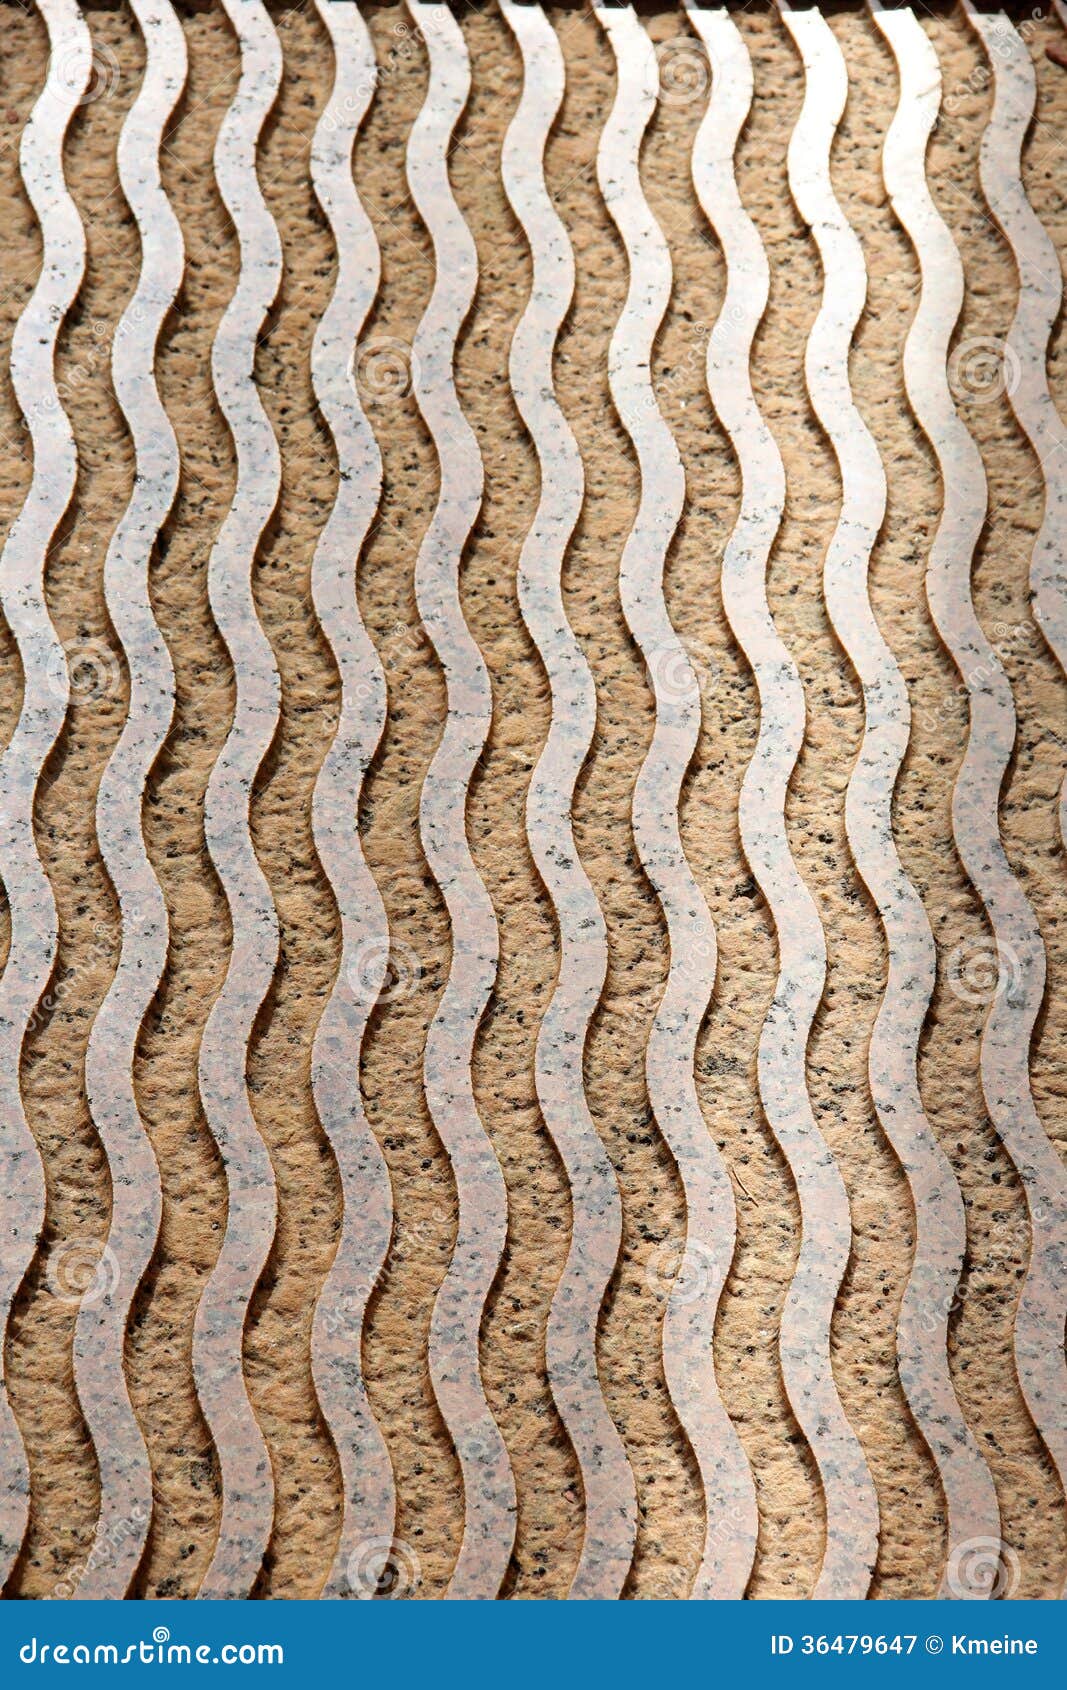 Wavy curved stone carving stock image. Image of lines - 36479647